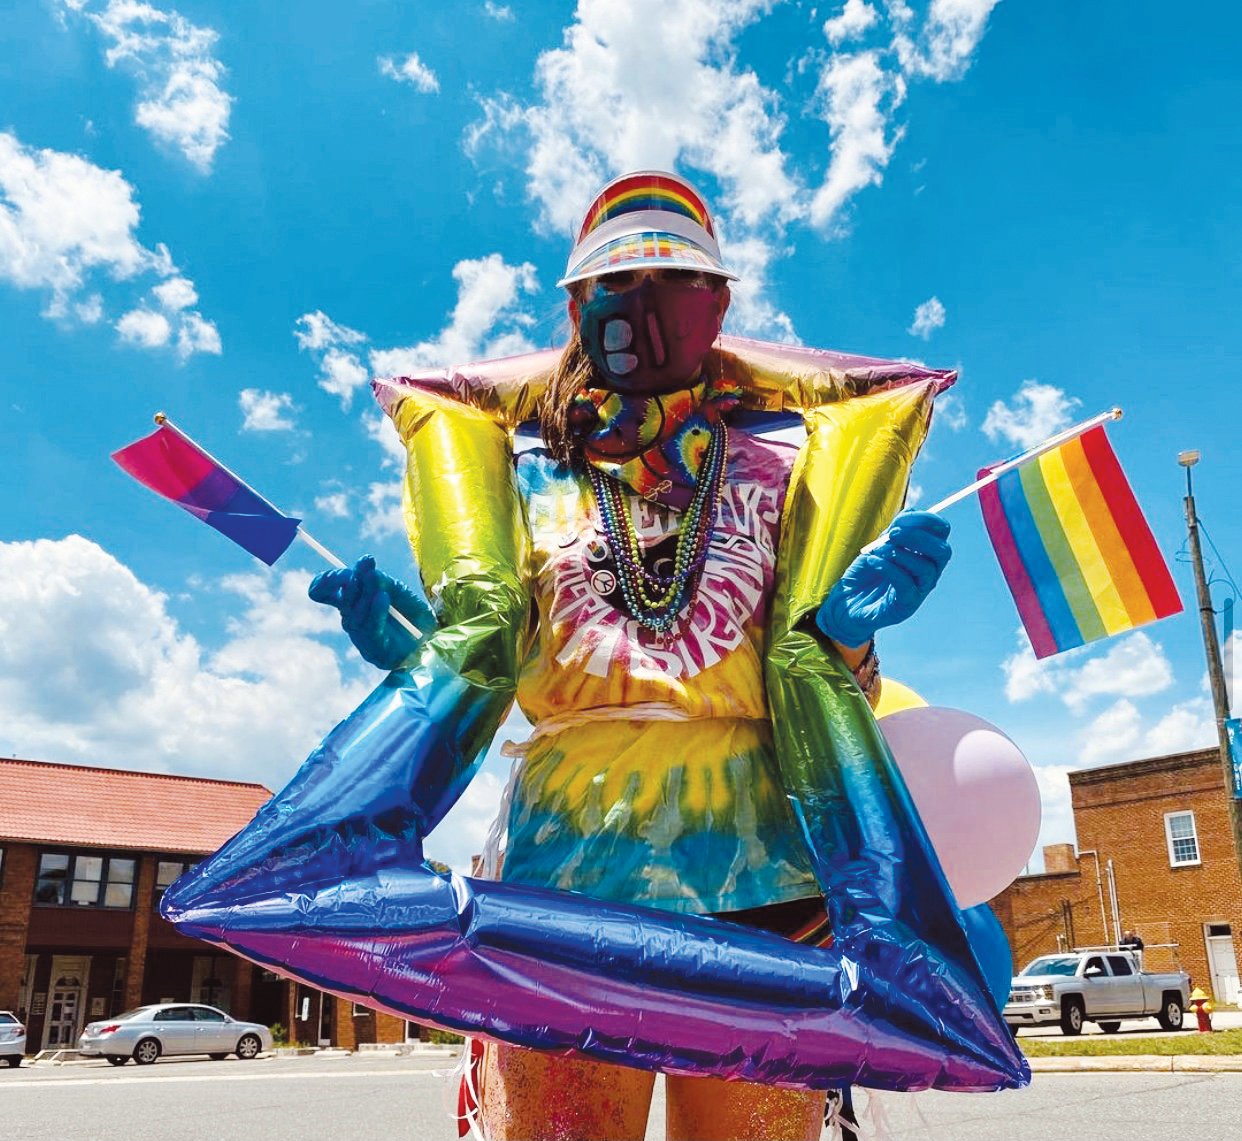 Caroline Puckett, co-president of Northwood High School's Pride club, shows off rainbow apparel at a Pittsboro Pride Day the club held June 26, 2020.